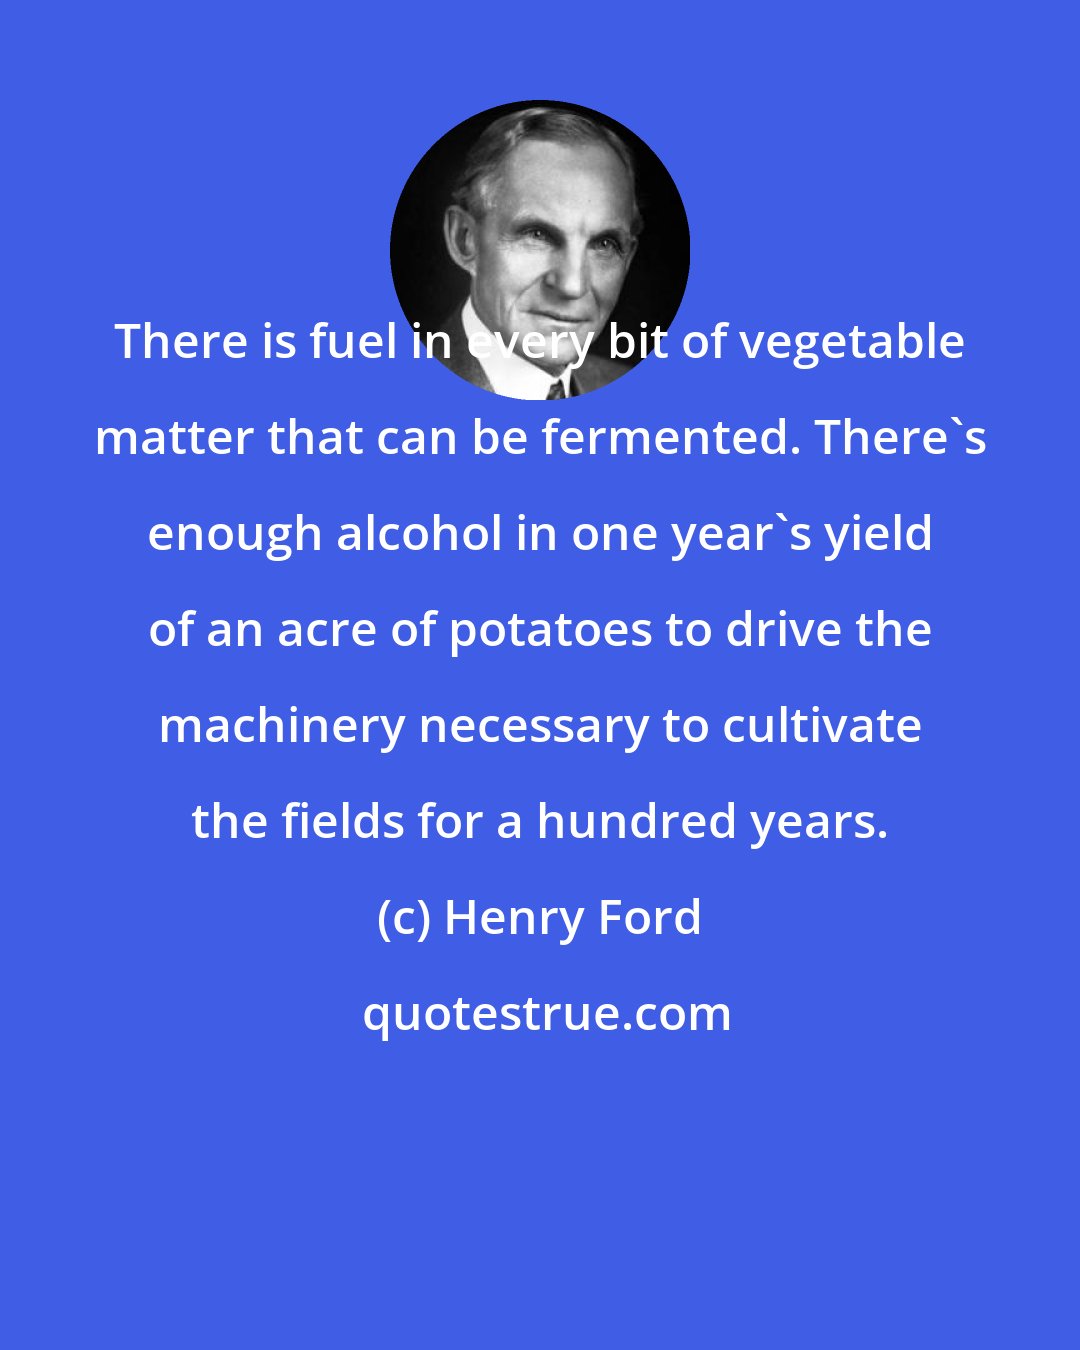 Henry Ford: There is fuel in every bit of vegetable matter that can be fermented. There's enough alcohol in one year's yield of an acre of potatoes to drive the machinery necessary to cultivate the fields for a hundred years.